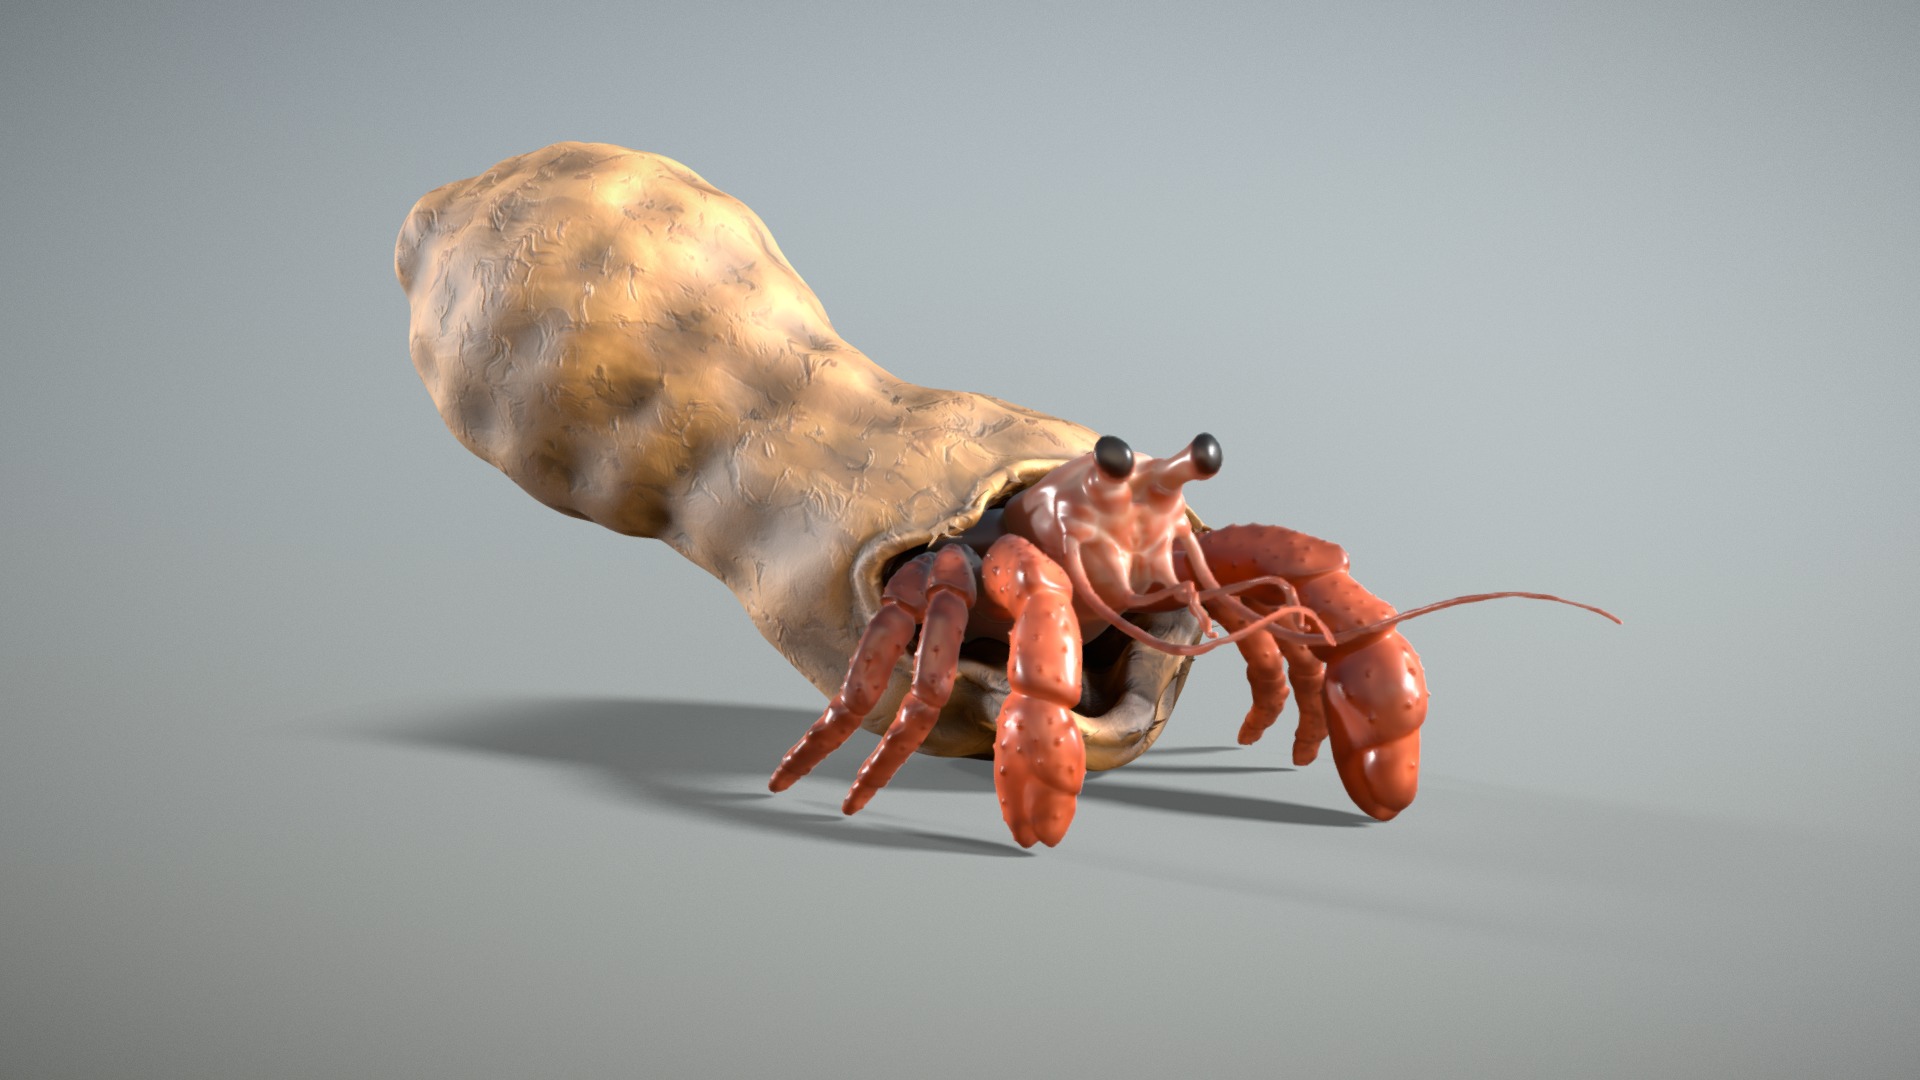 3D model SculptJanuary18 Day 25: Nature-Shell - This is a 3D model of the SculptJanuary18 Day 25: Nature-Shell. The 3D model is about a shrimp with a shell.